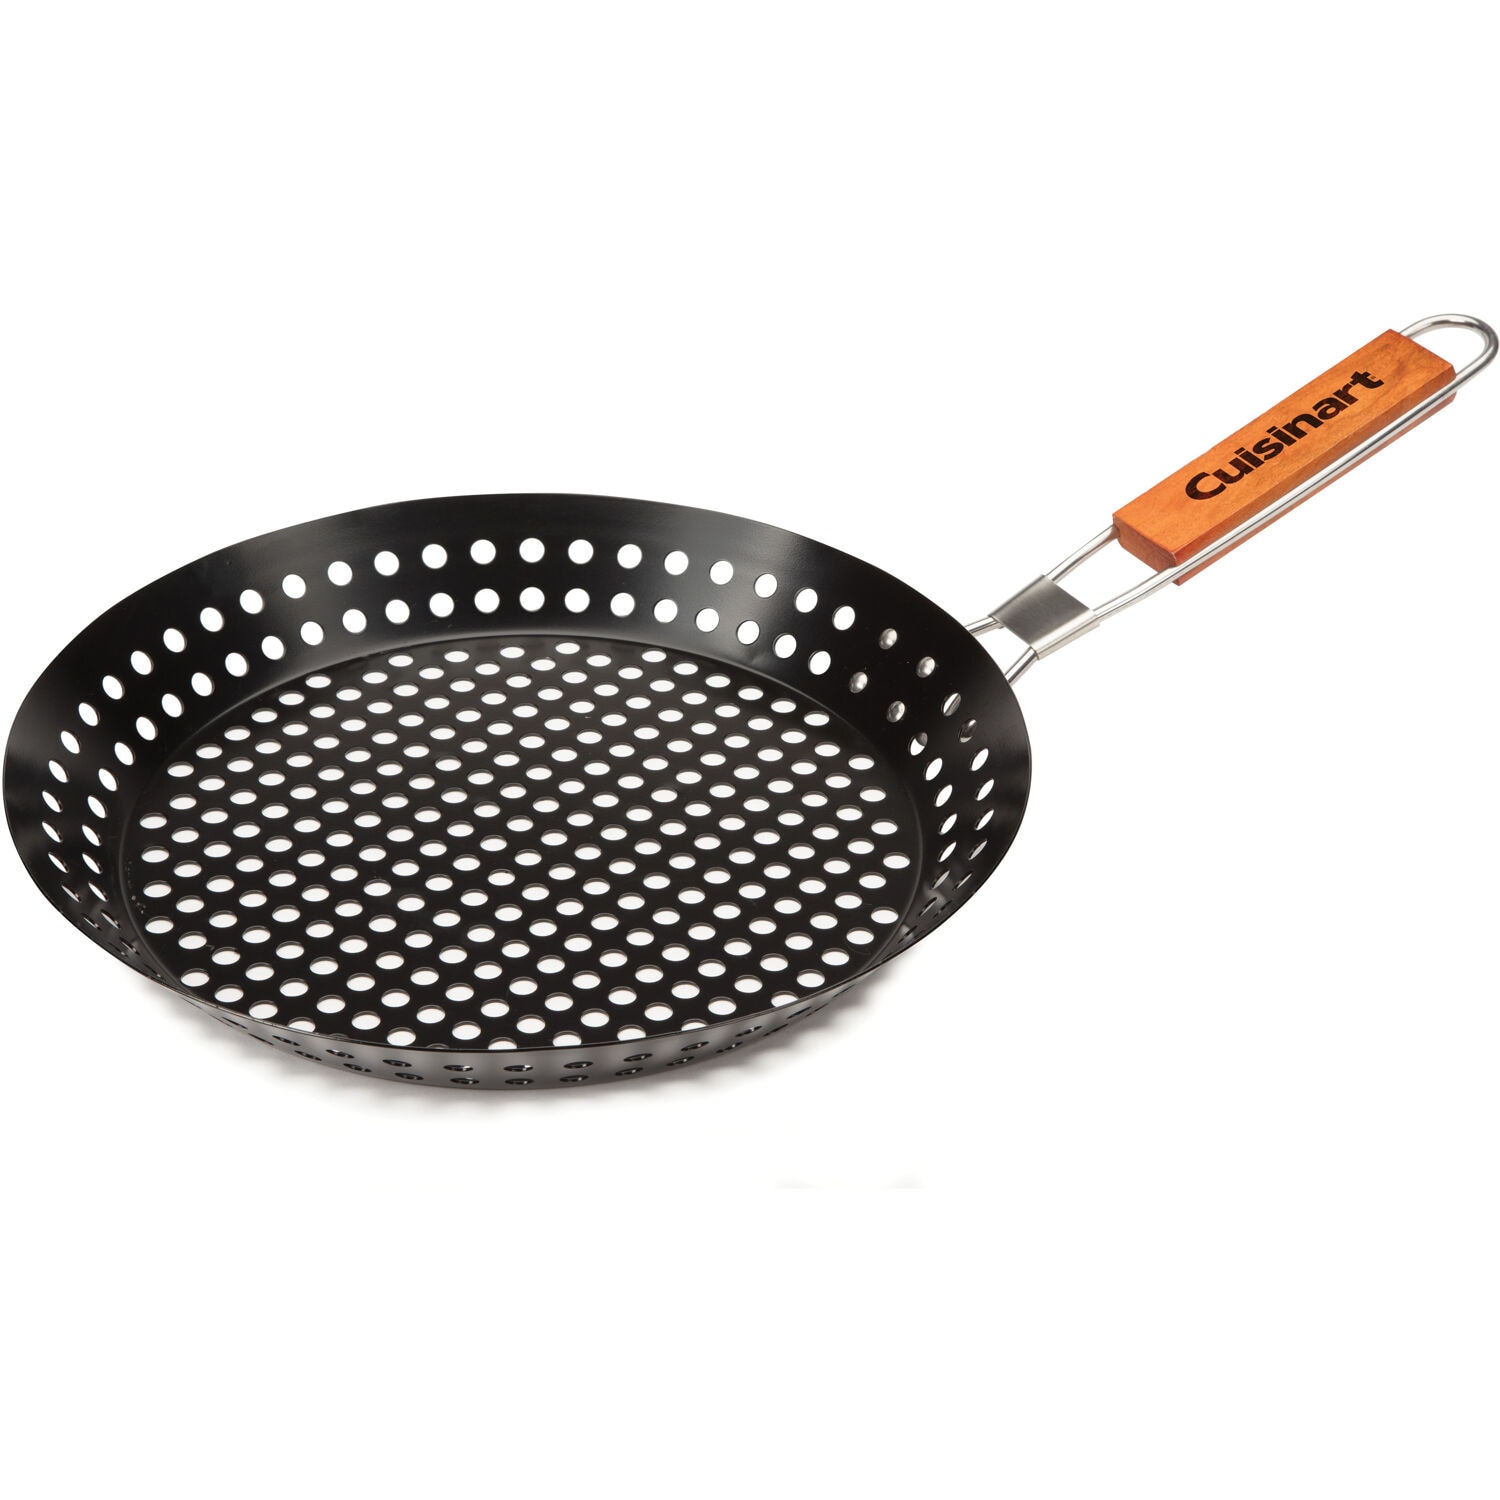 Cuisinart 2-Pack Cast Iron Non-Stick Griddle and Pan Set in the